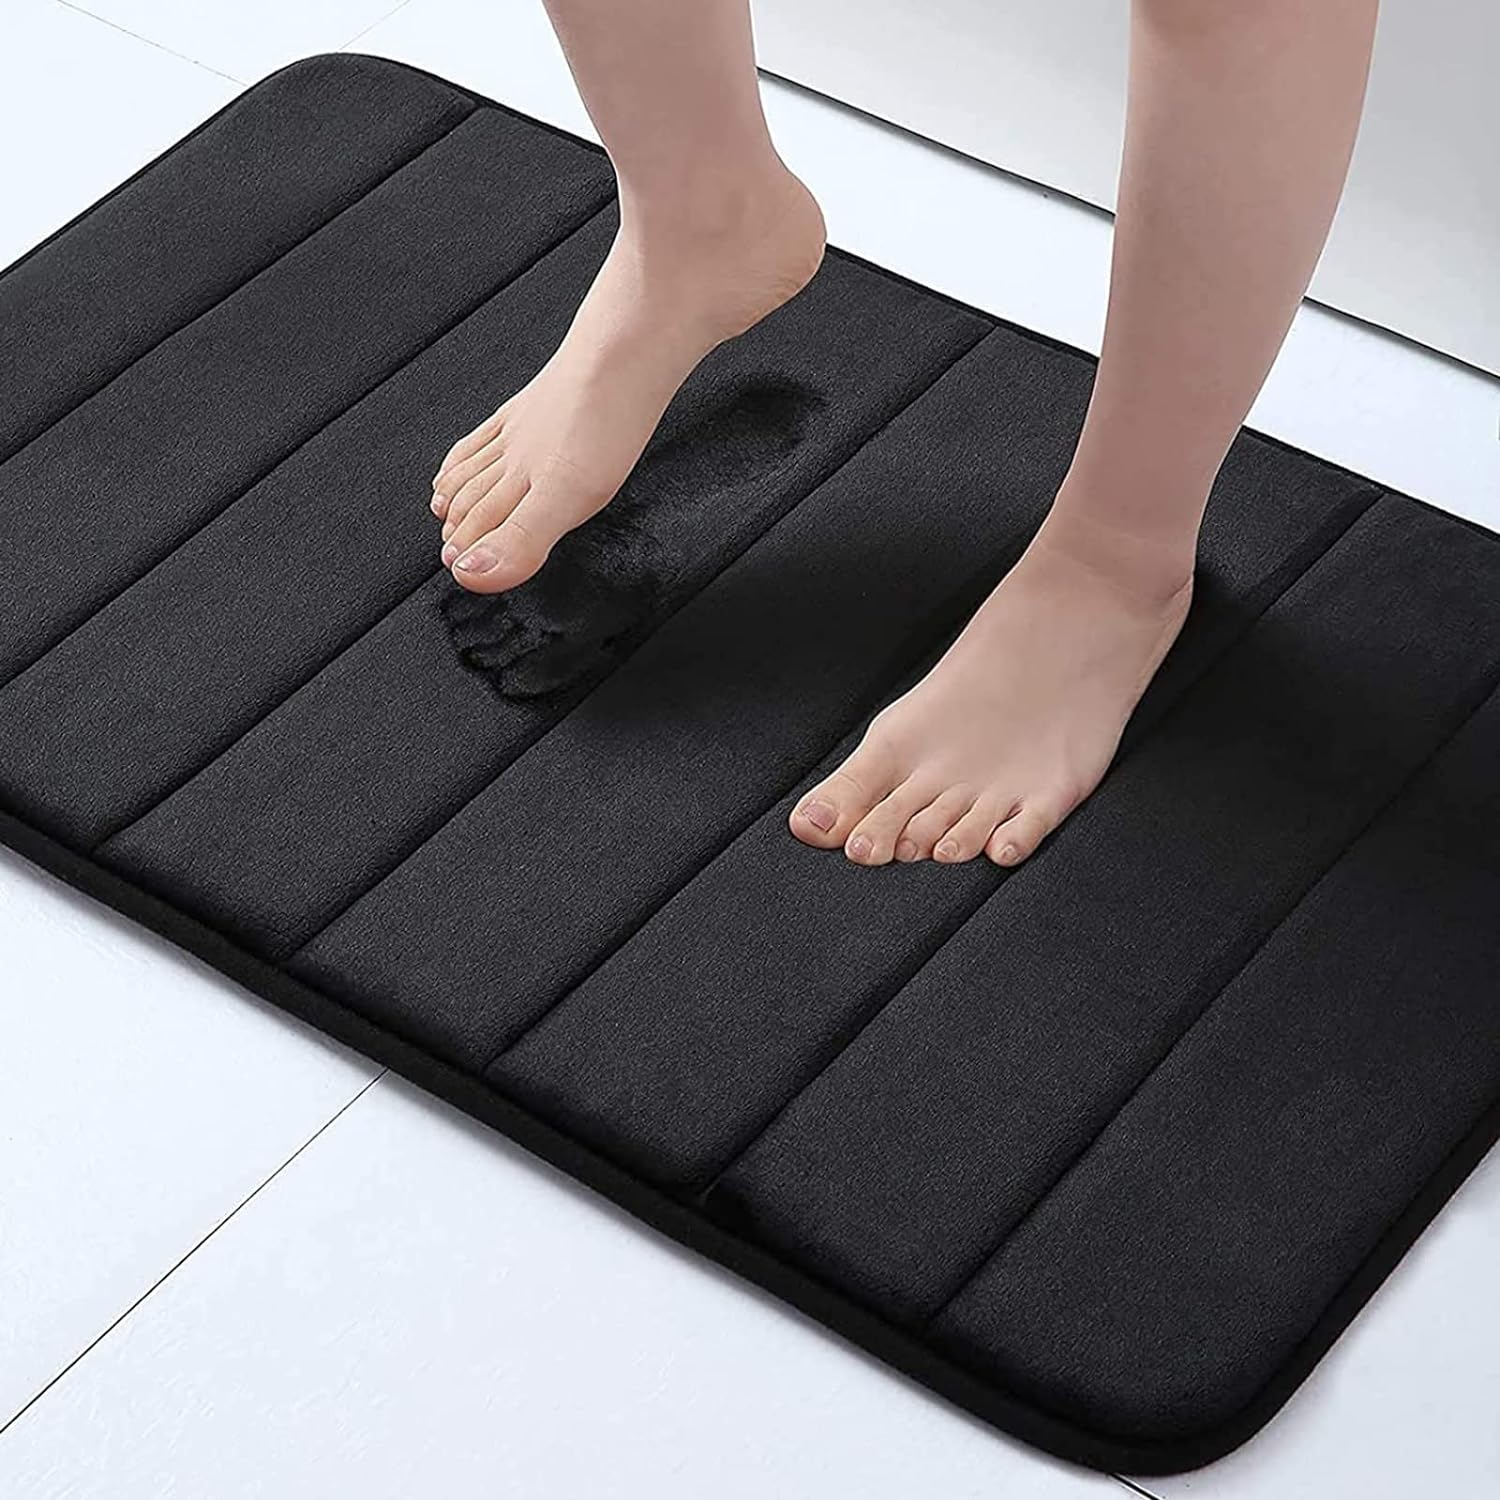 Buying Guide for the Best Comfortable Bath Mats